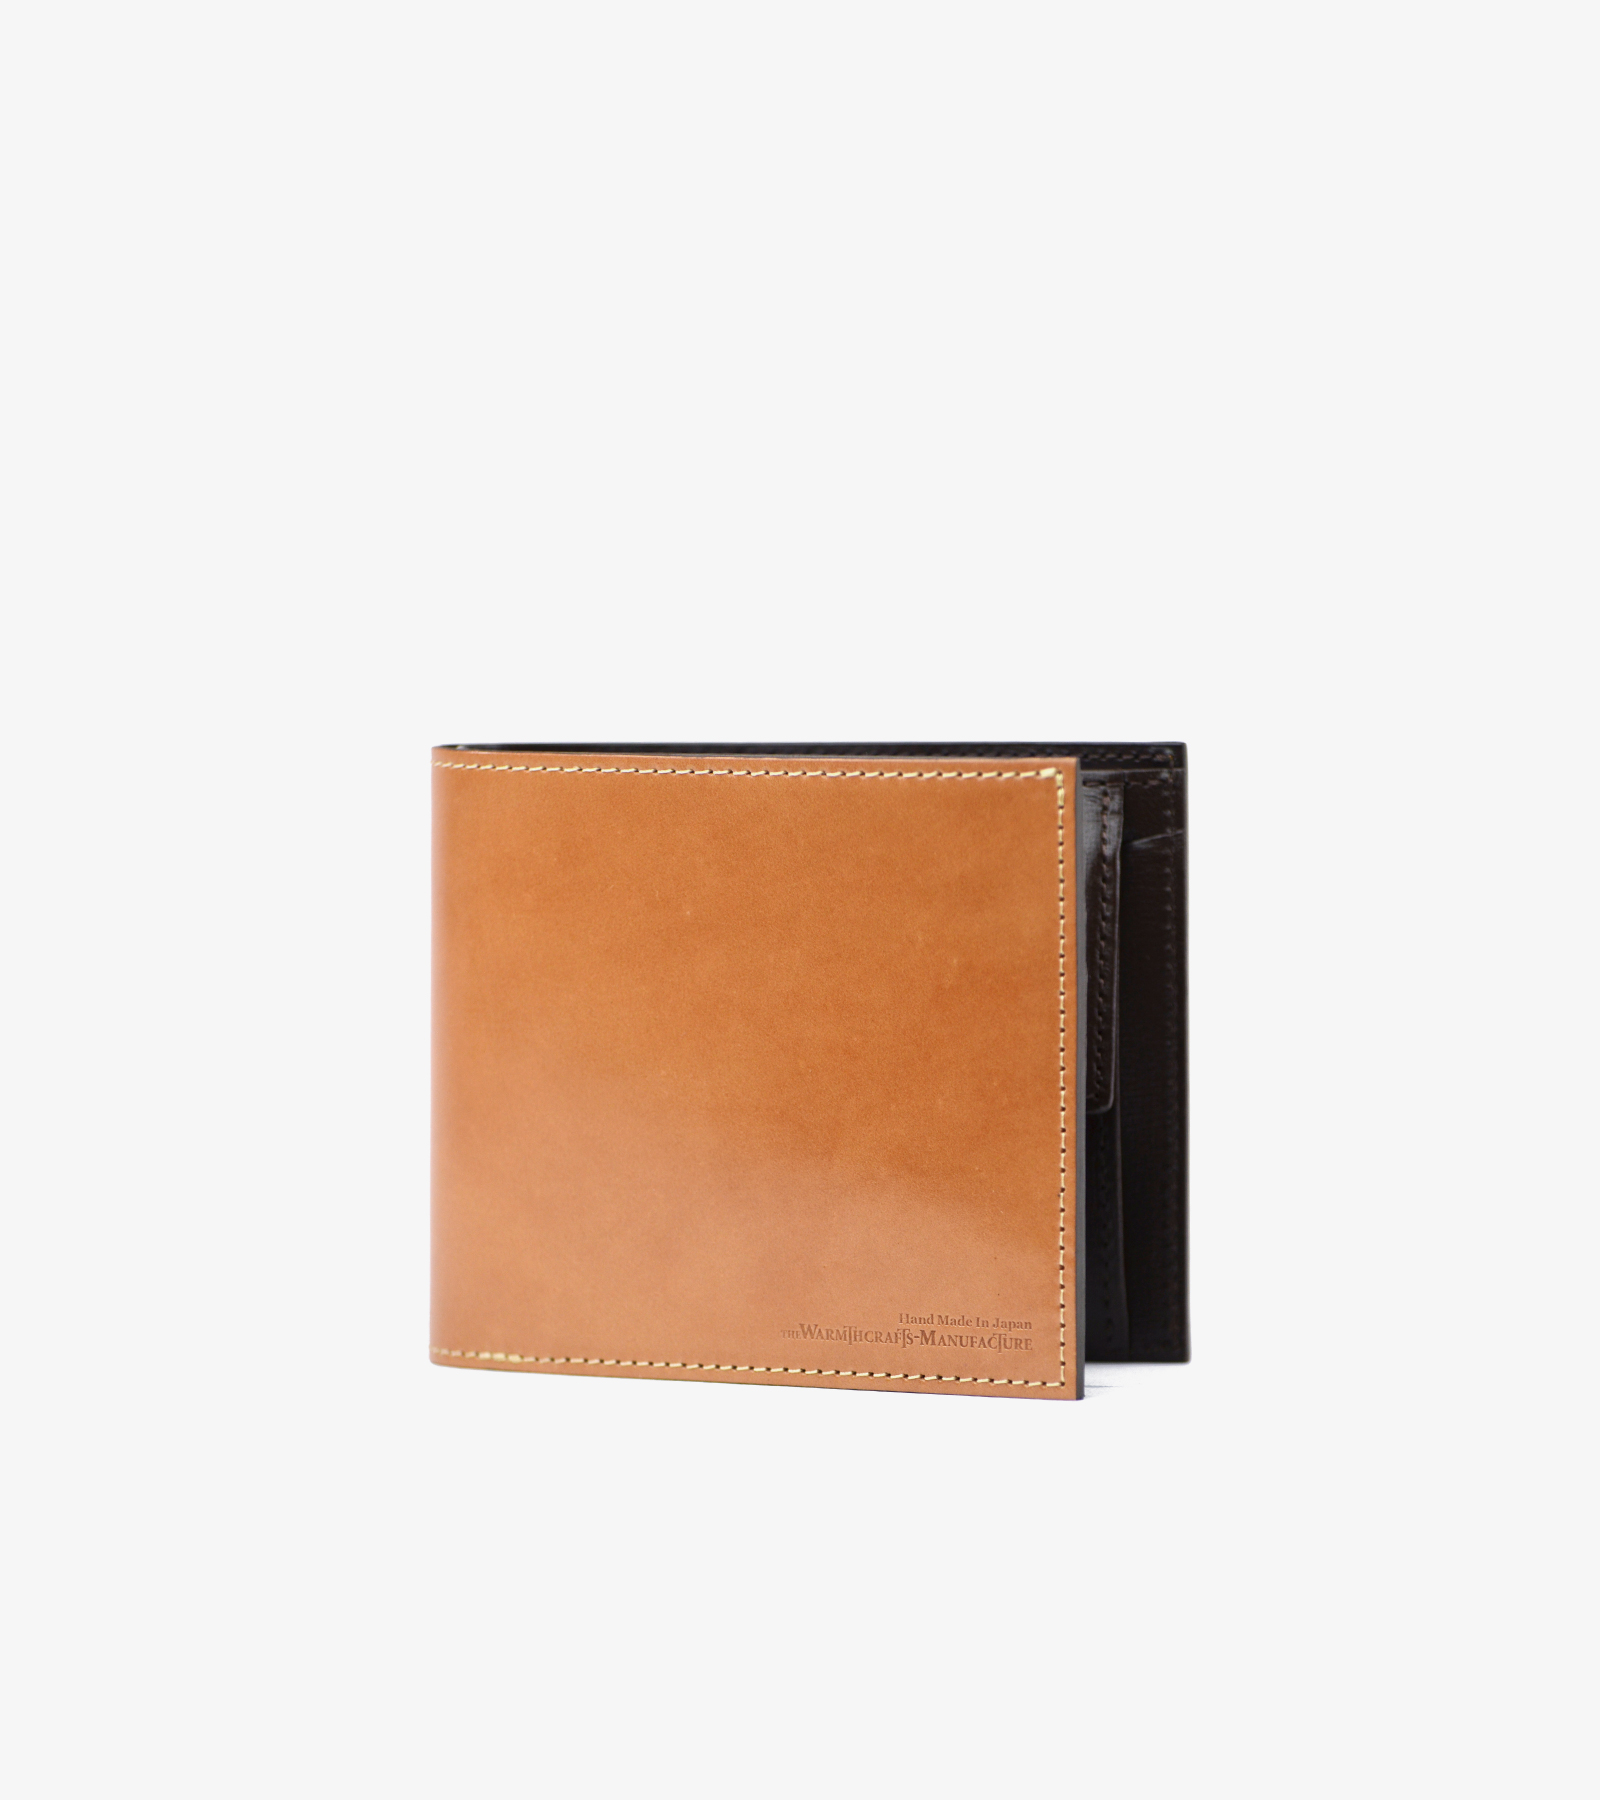 CORDVAN COMPACT WALLET2 / The Warmthcrafts Manufacture Web Store